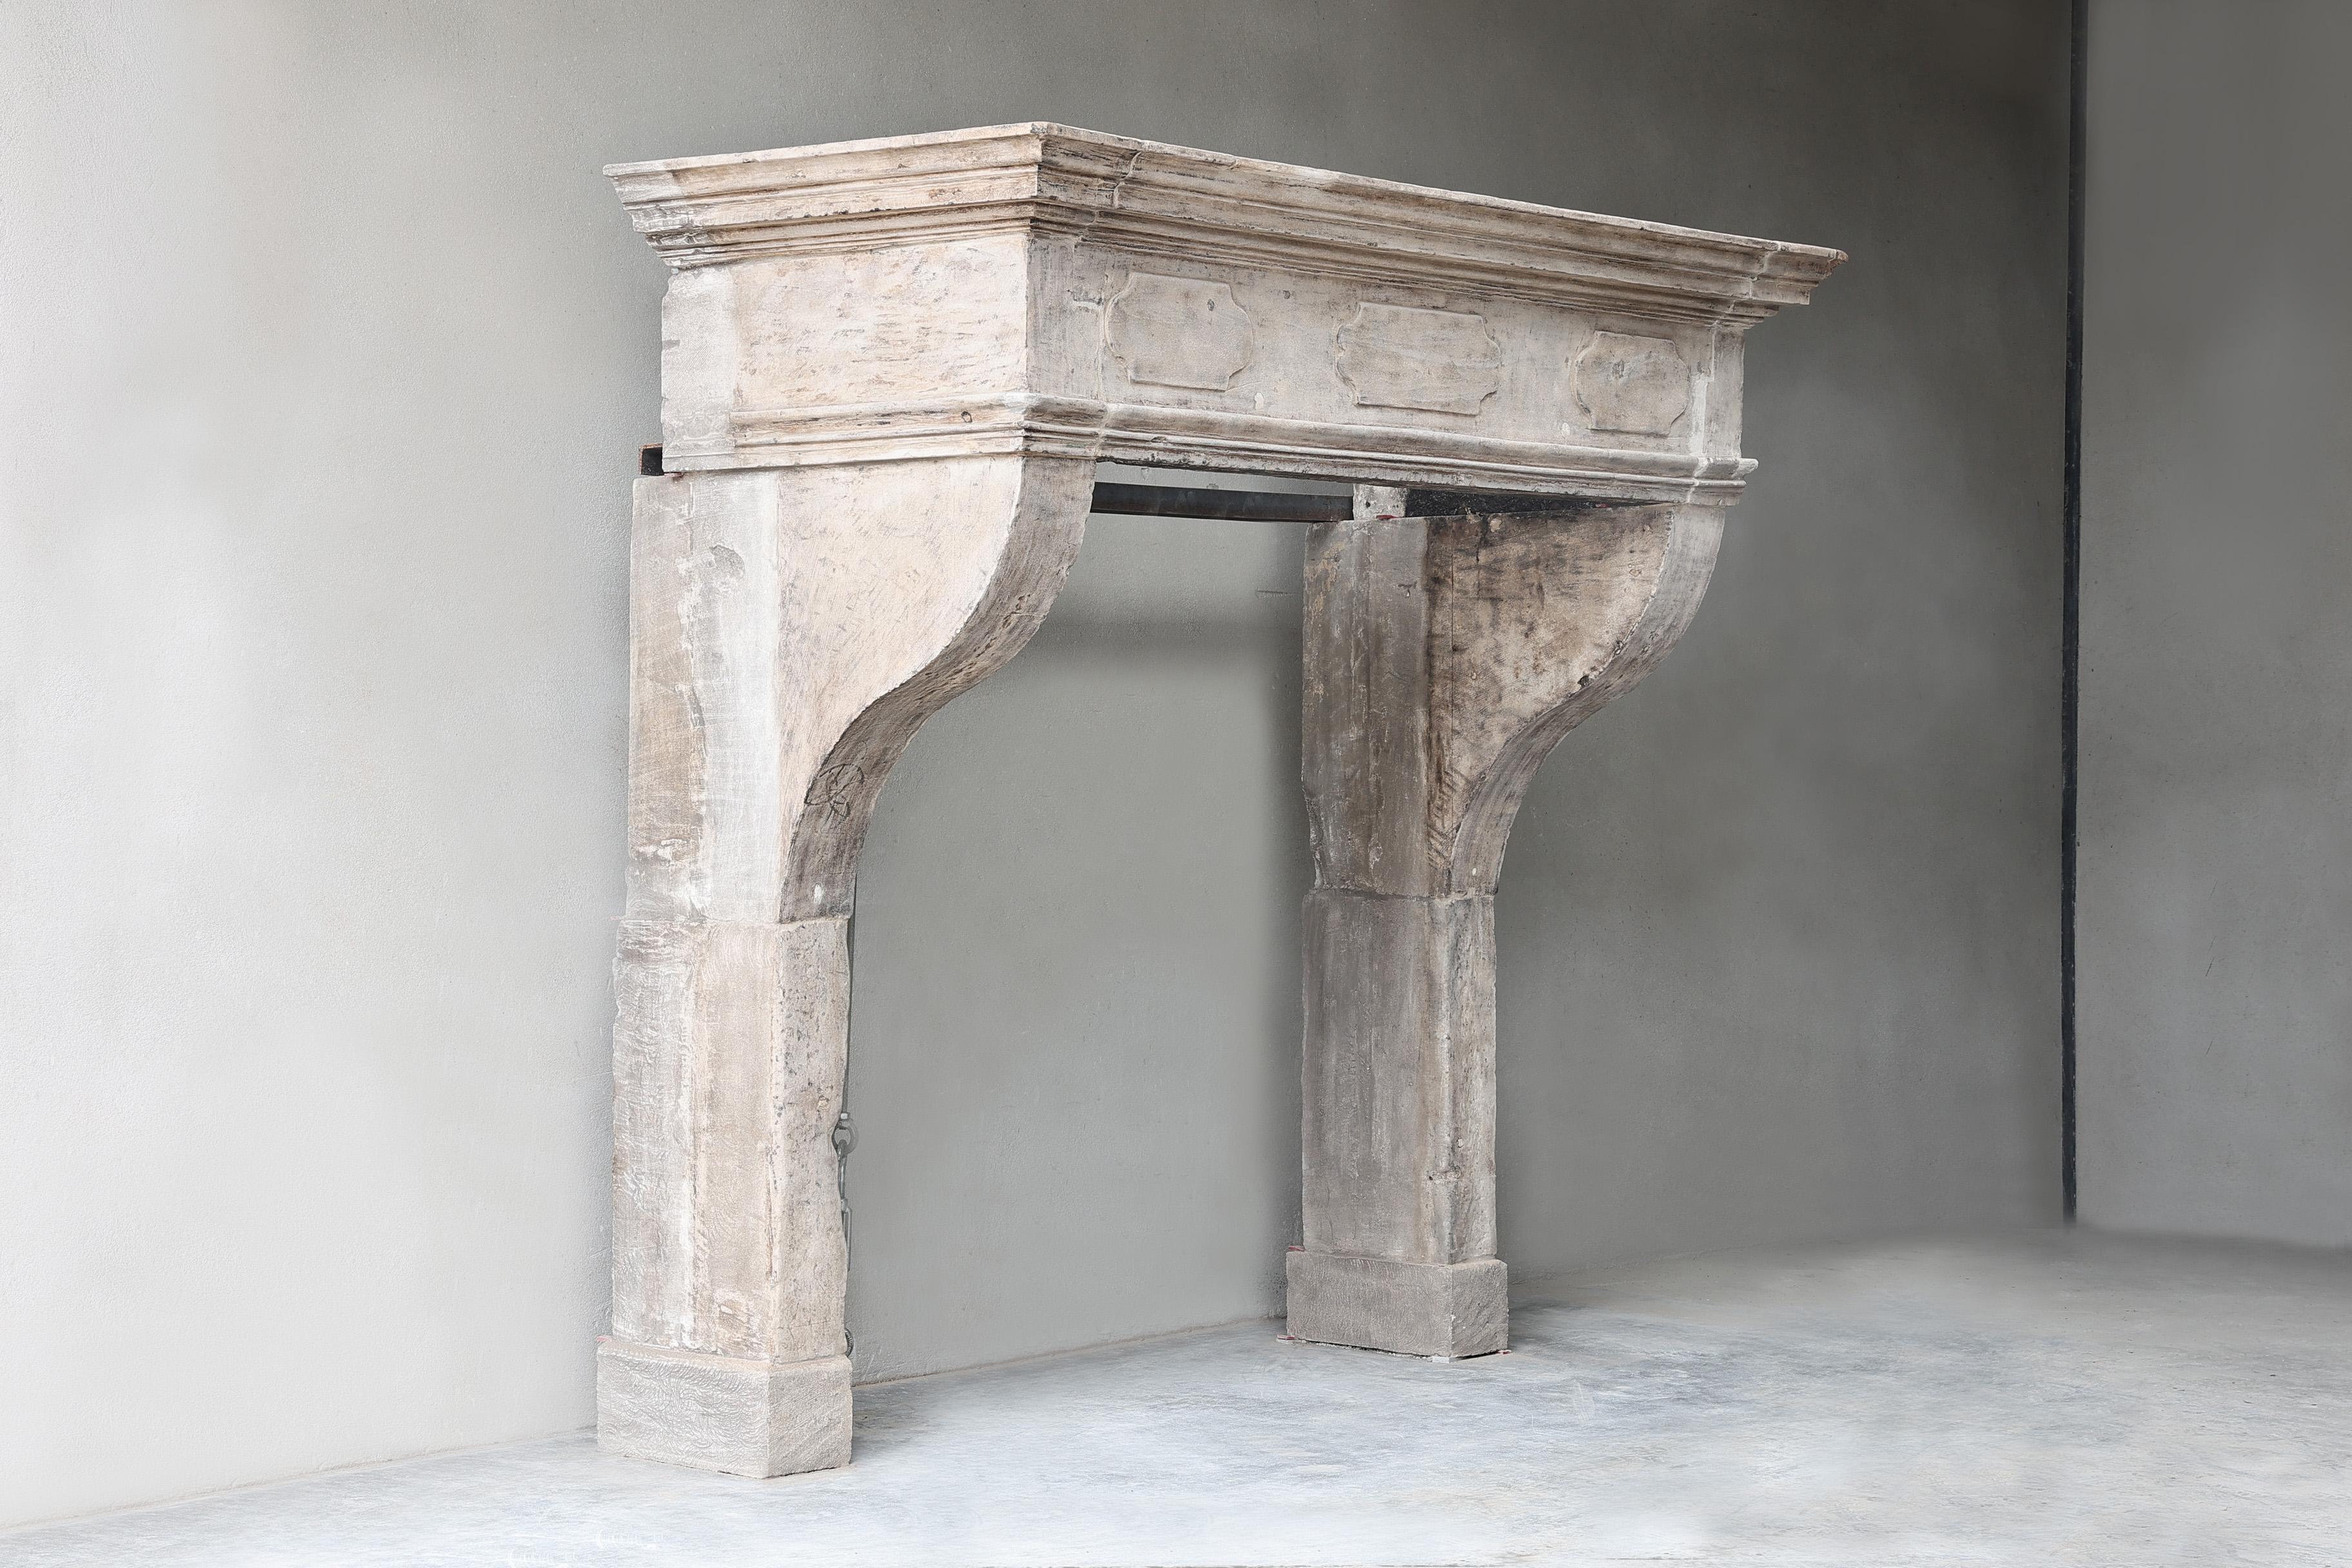 Very impressive antique castle mantelpiece made of French limestone from the 19th century! A beautiful robust fireplace with a warm color scheme and beautiful ornaments in the front part. This mantelpiece is in the style of Louis XIII and fits